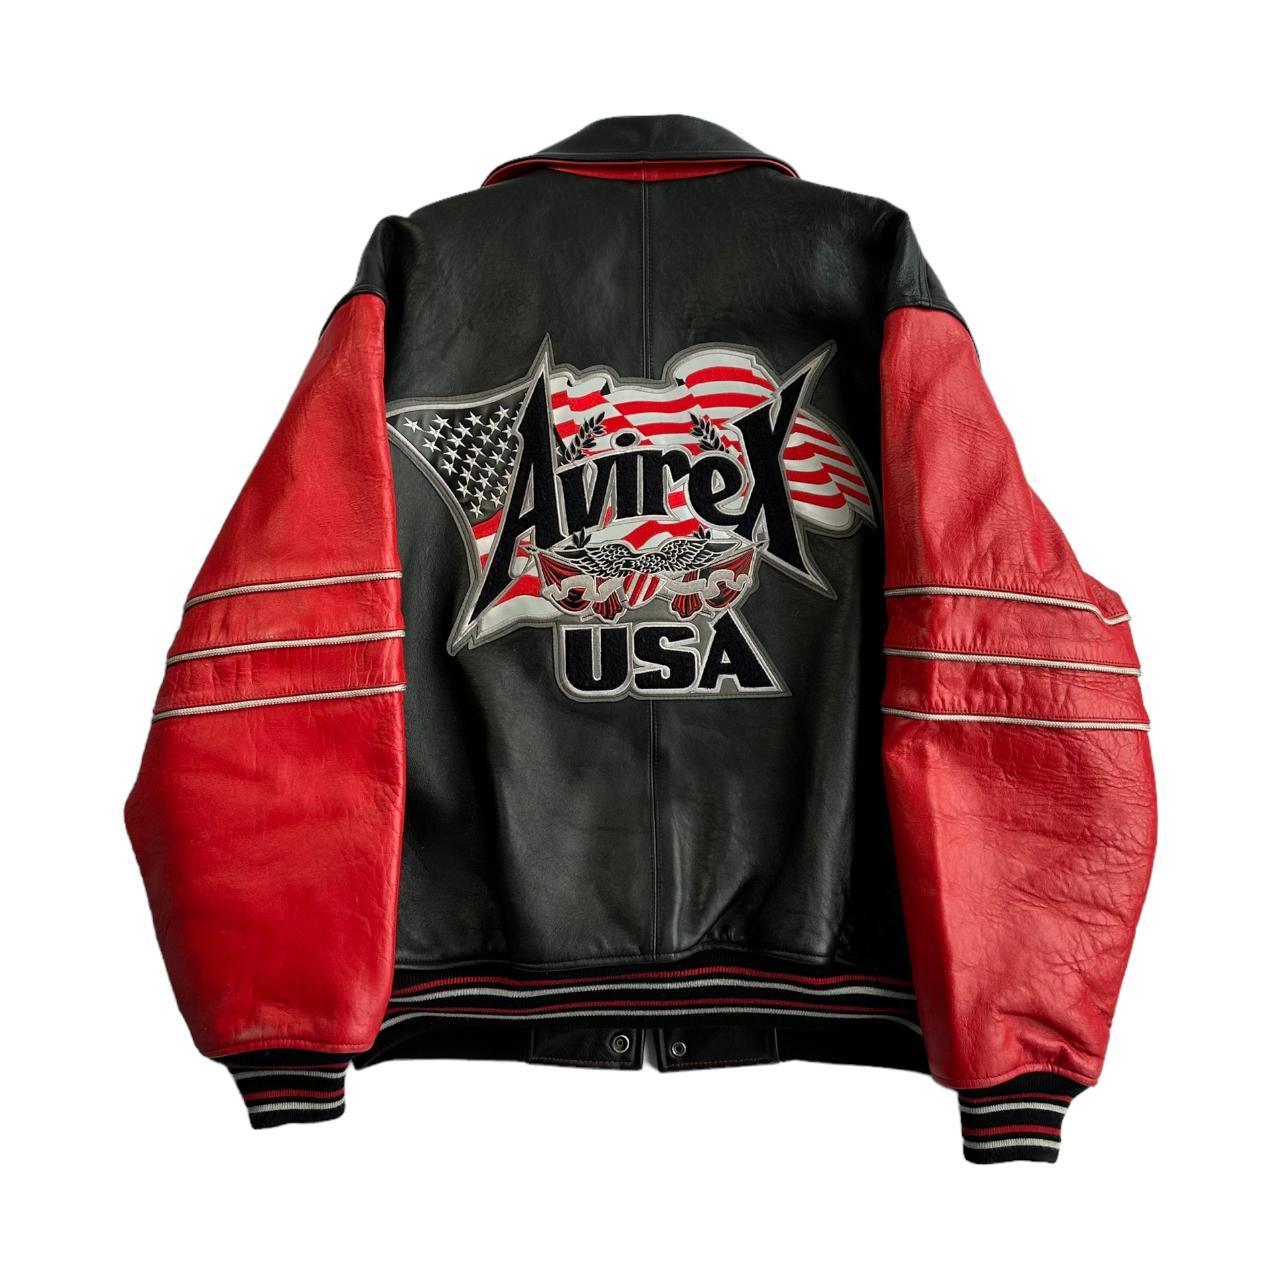 Avirex Jacket Red and black Leather USA - Known Source